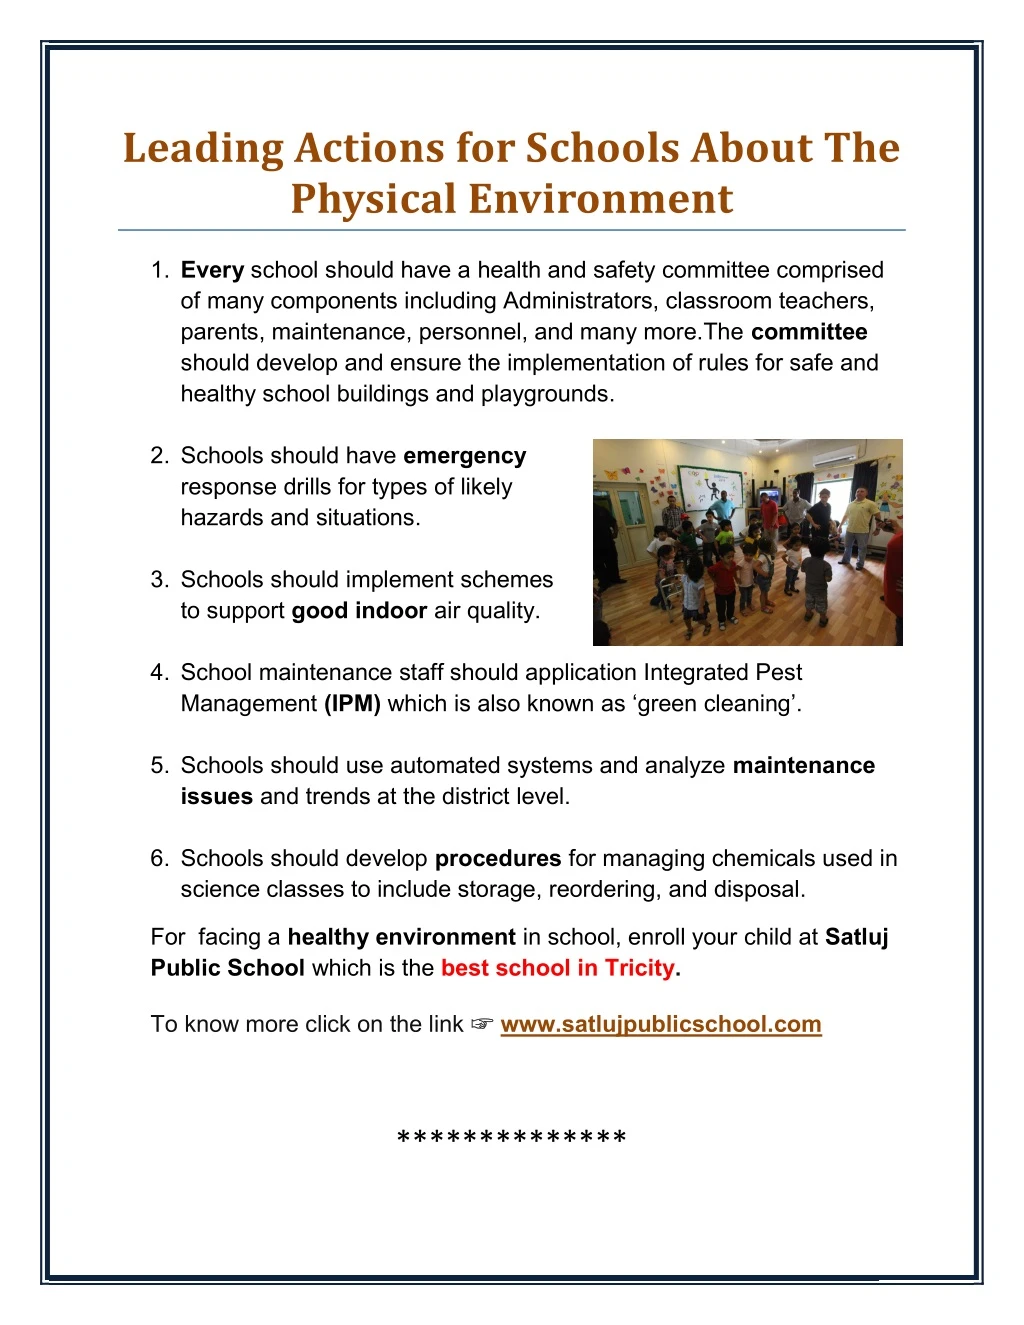 leading actions for schools about the physical